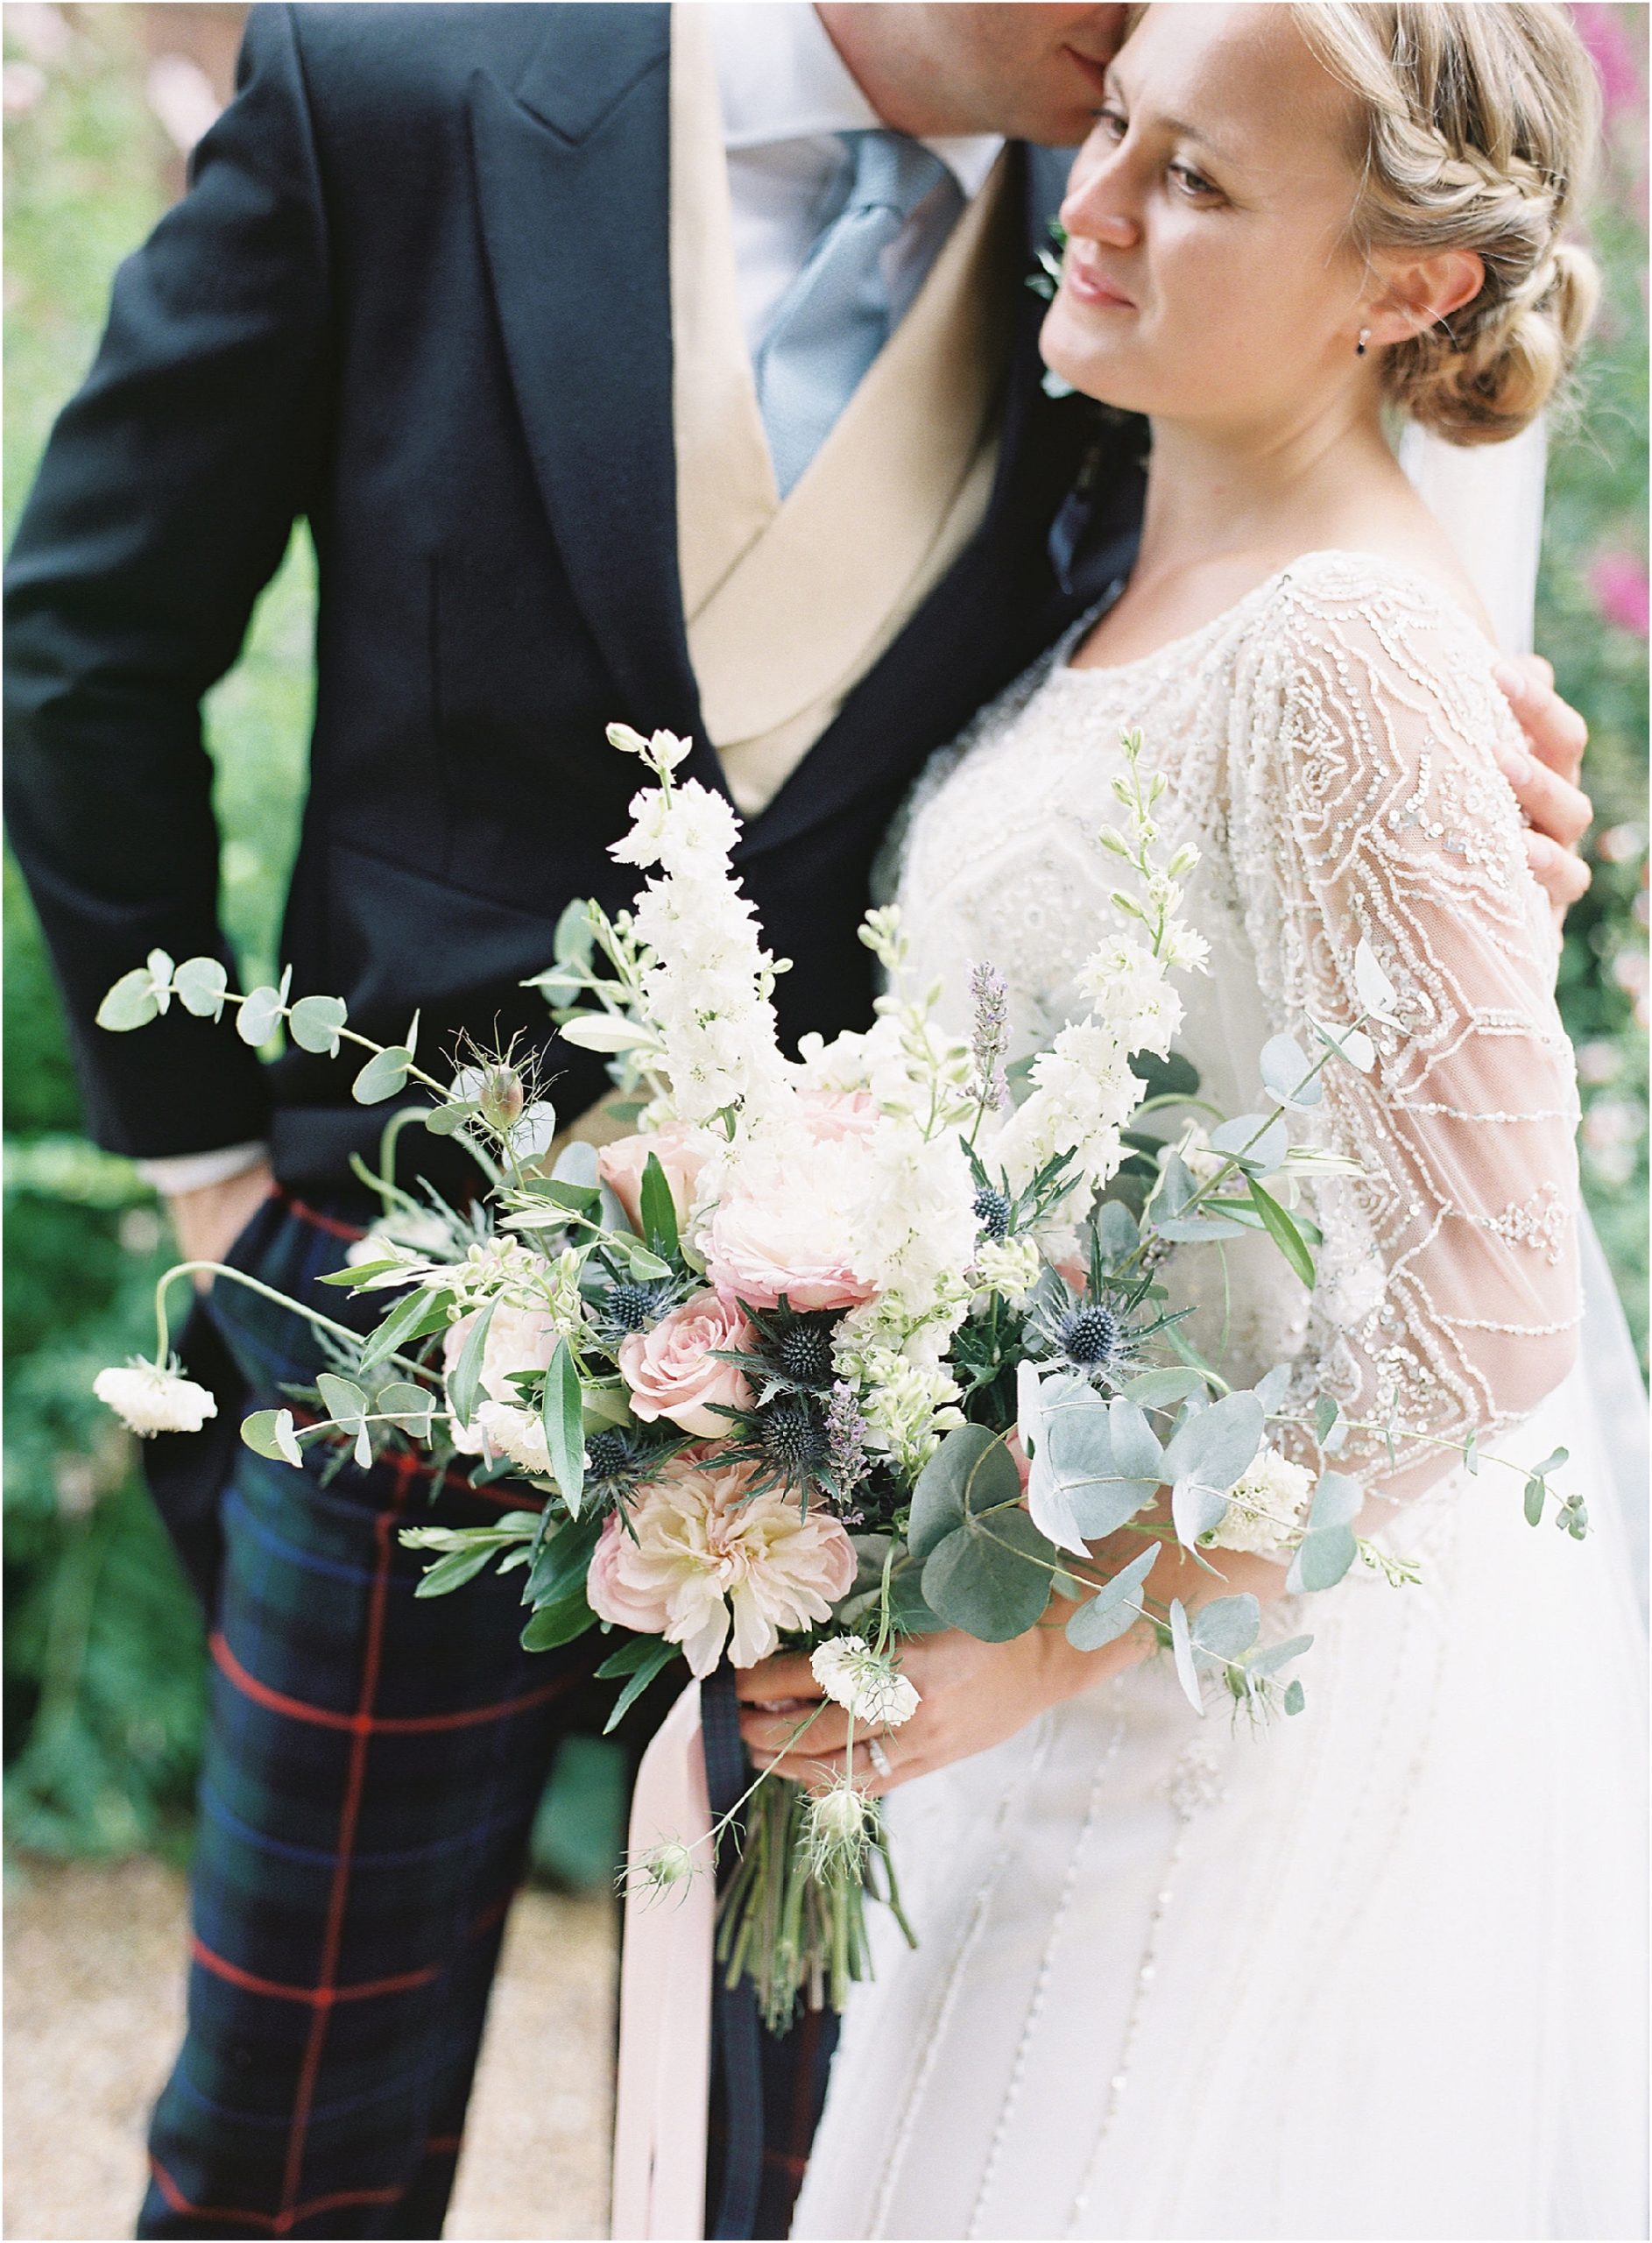 Bride and groom cuddling and holding a wildflower bouquet